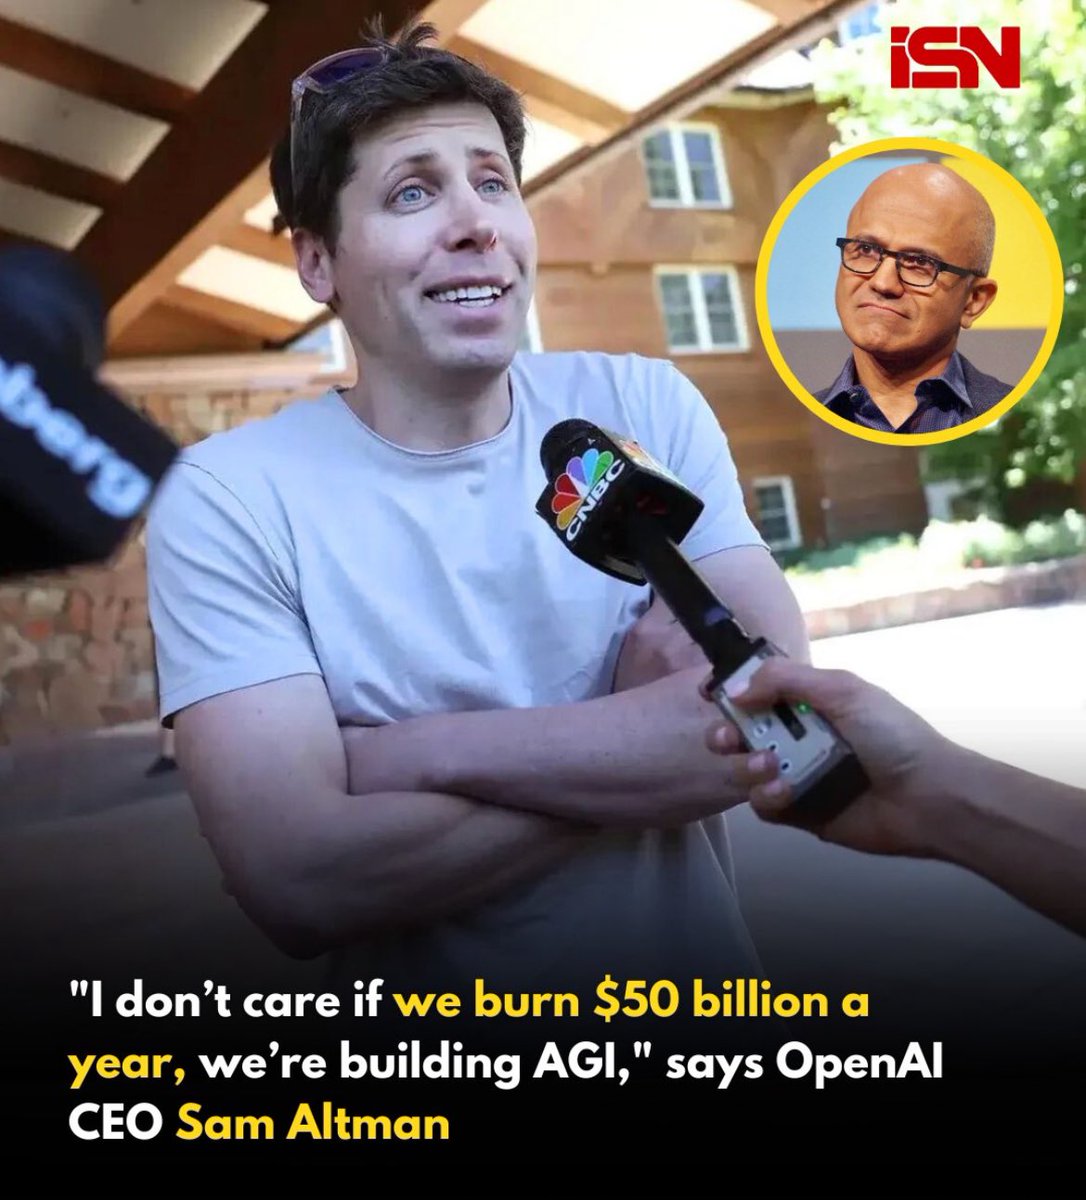 Sam Altman says - “I don’t care if we burn $50 billion a year, we’re building AGI”.

What’s your opinion on this? 
What do you think we can do better with $50 billion? 

#samaltman #OpenAI #AGI